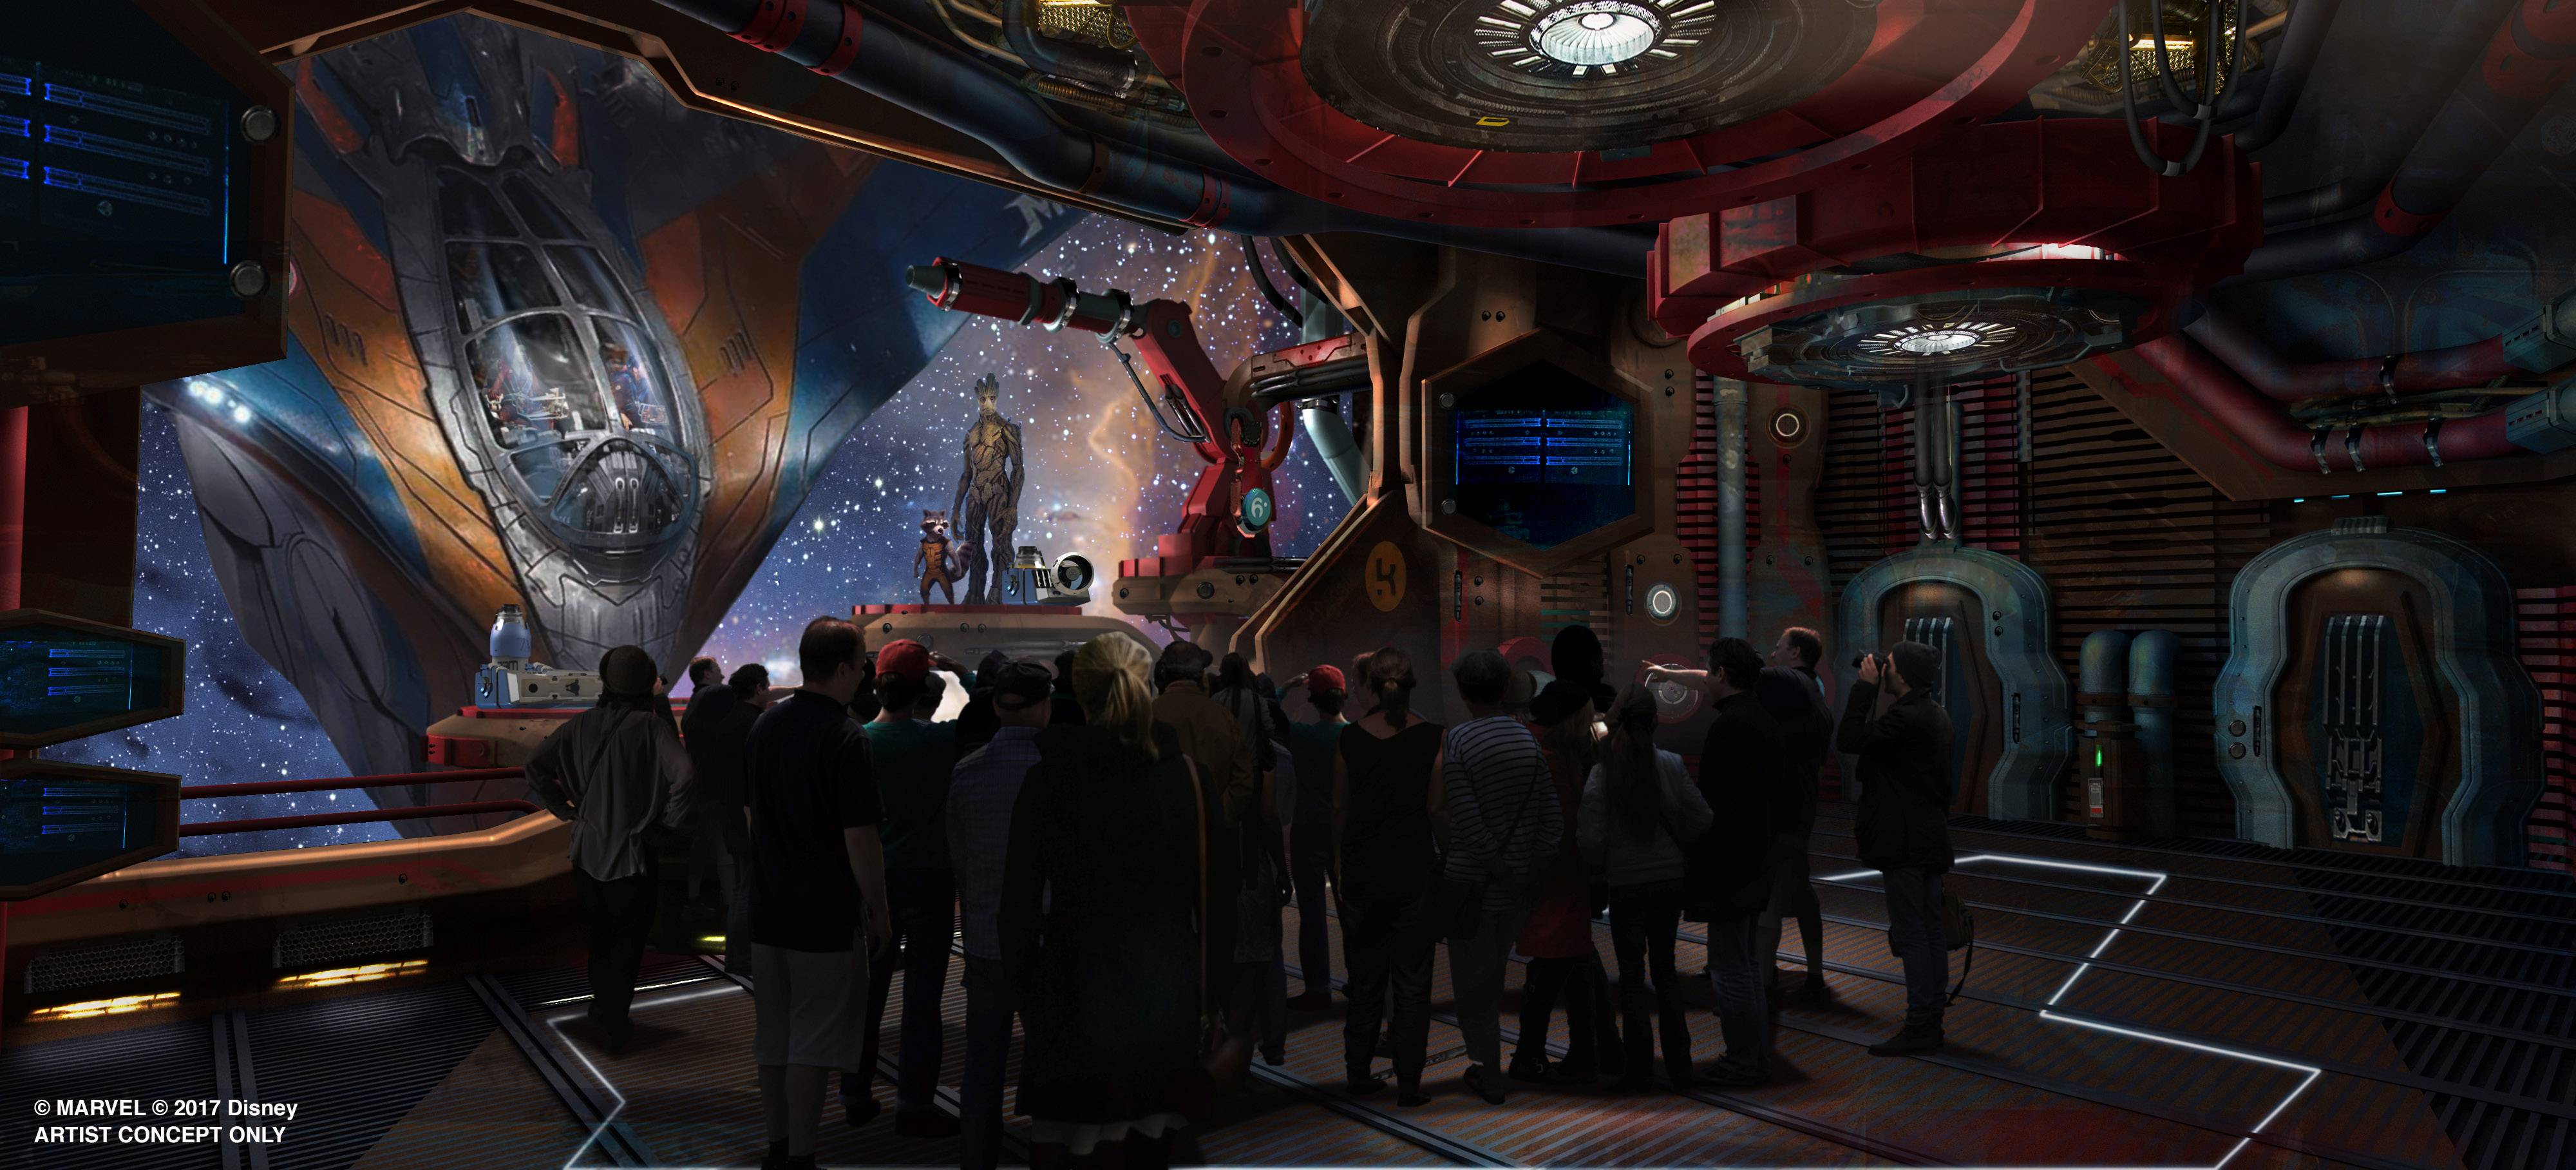 'Guardians of the Galaxy Cosmic Rewind' Pre-show at the Wonder of Xandar pavilion